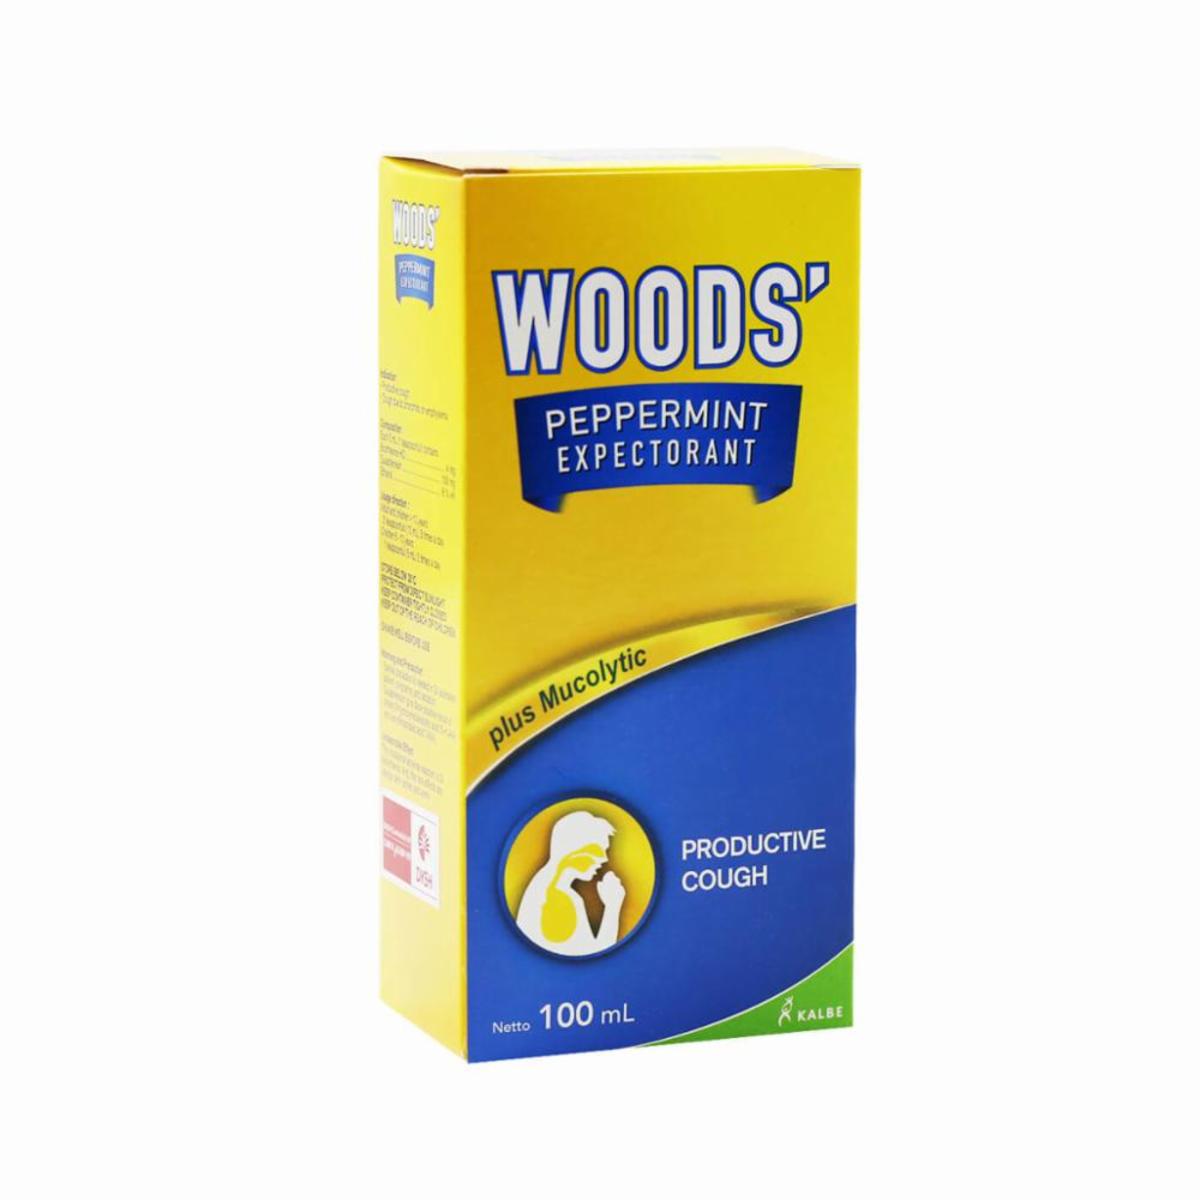 Woods' Cough Syrup Expectorant 100ml